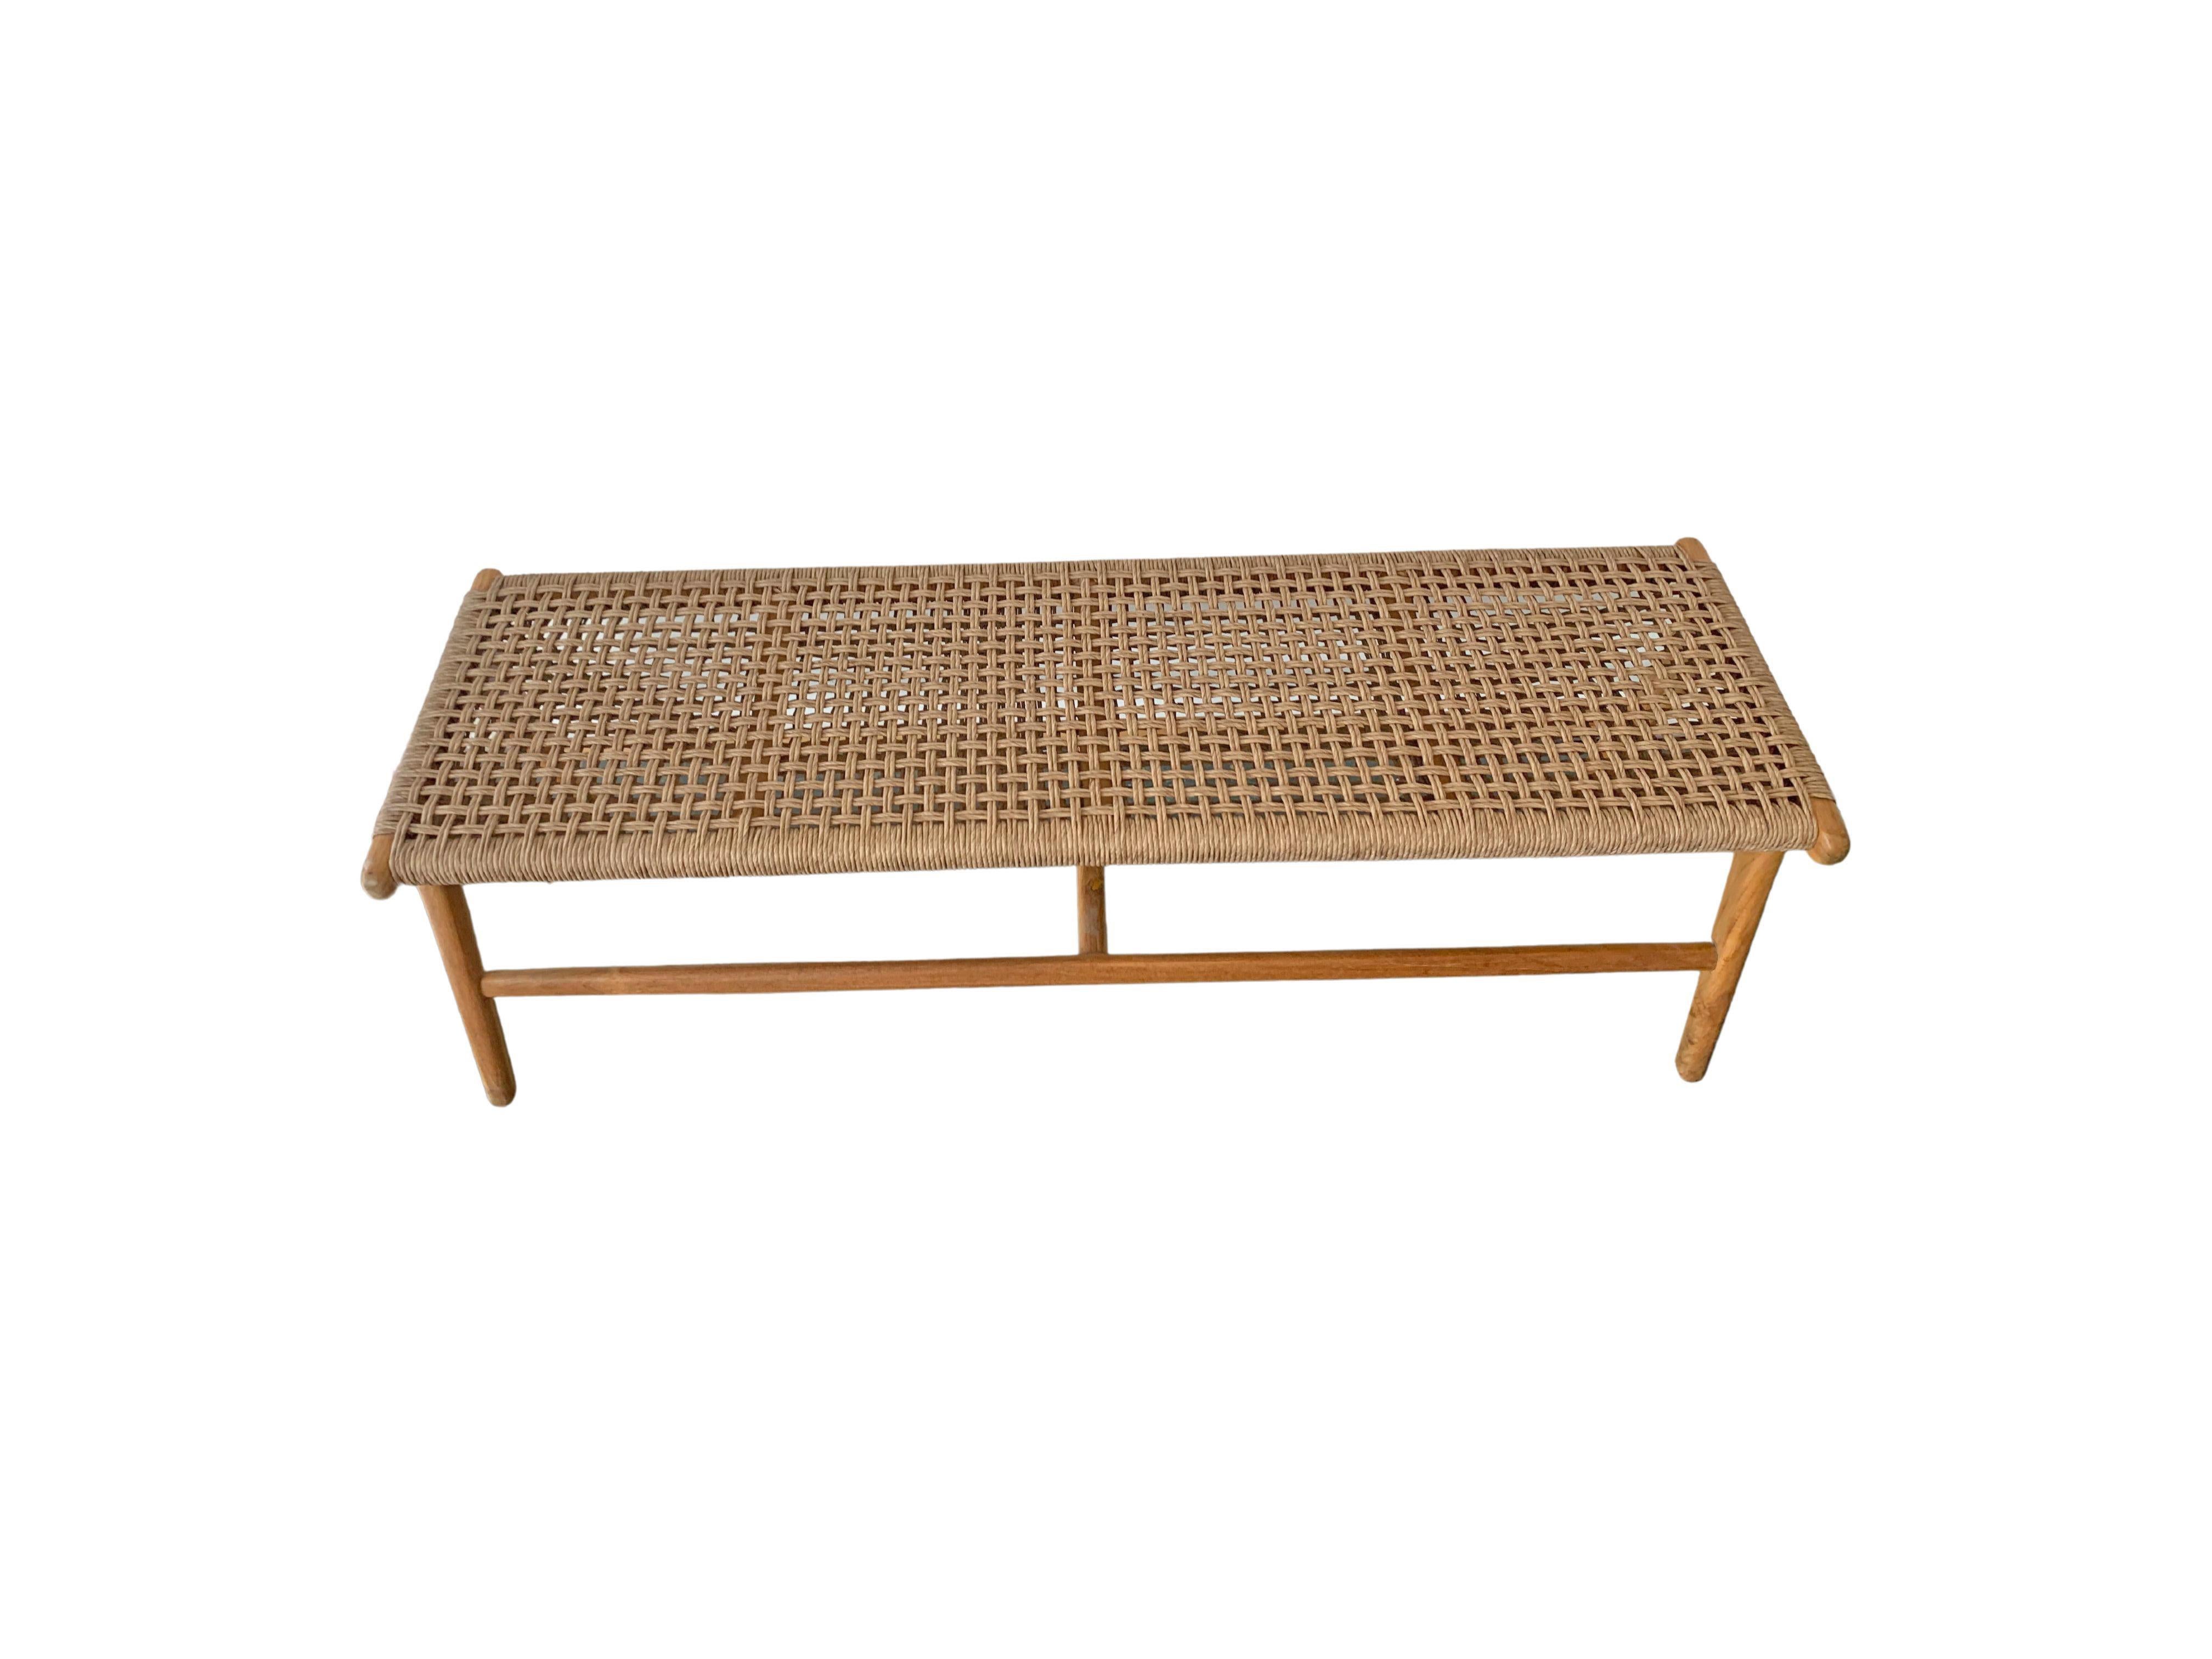 Indonesian Teak Wood Framed Bench, with Woven Synthetic Rattan Seat For Sale